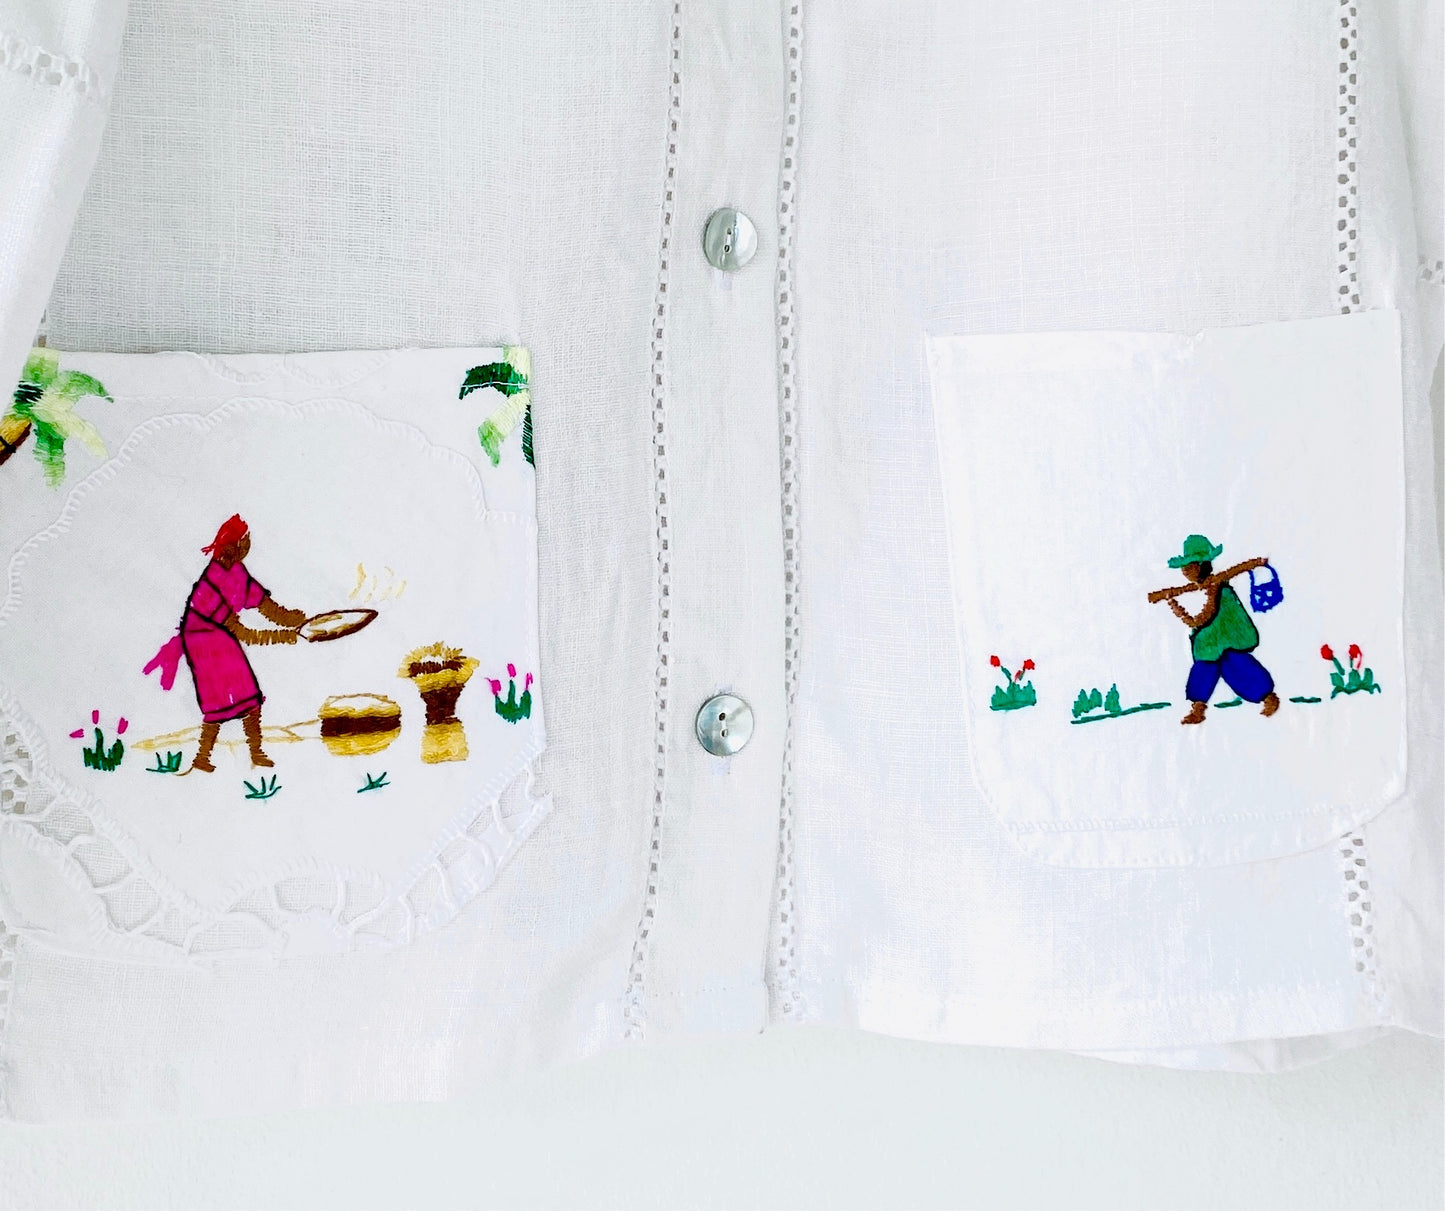 Petit pays hand embroidered jacket